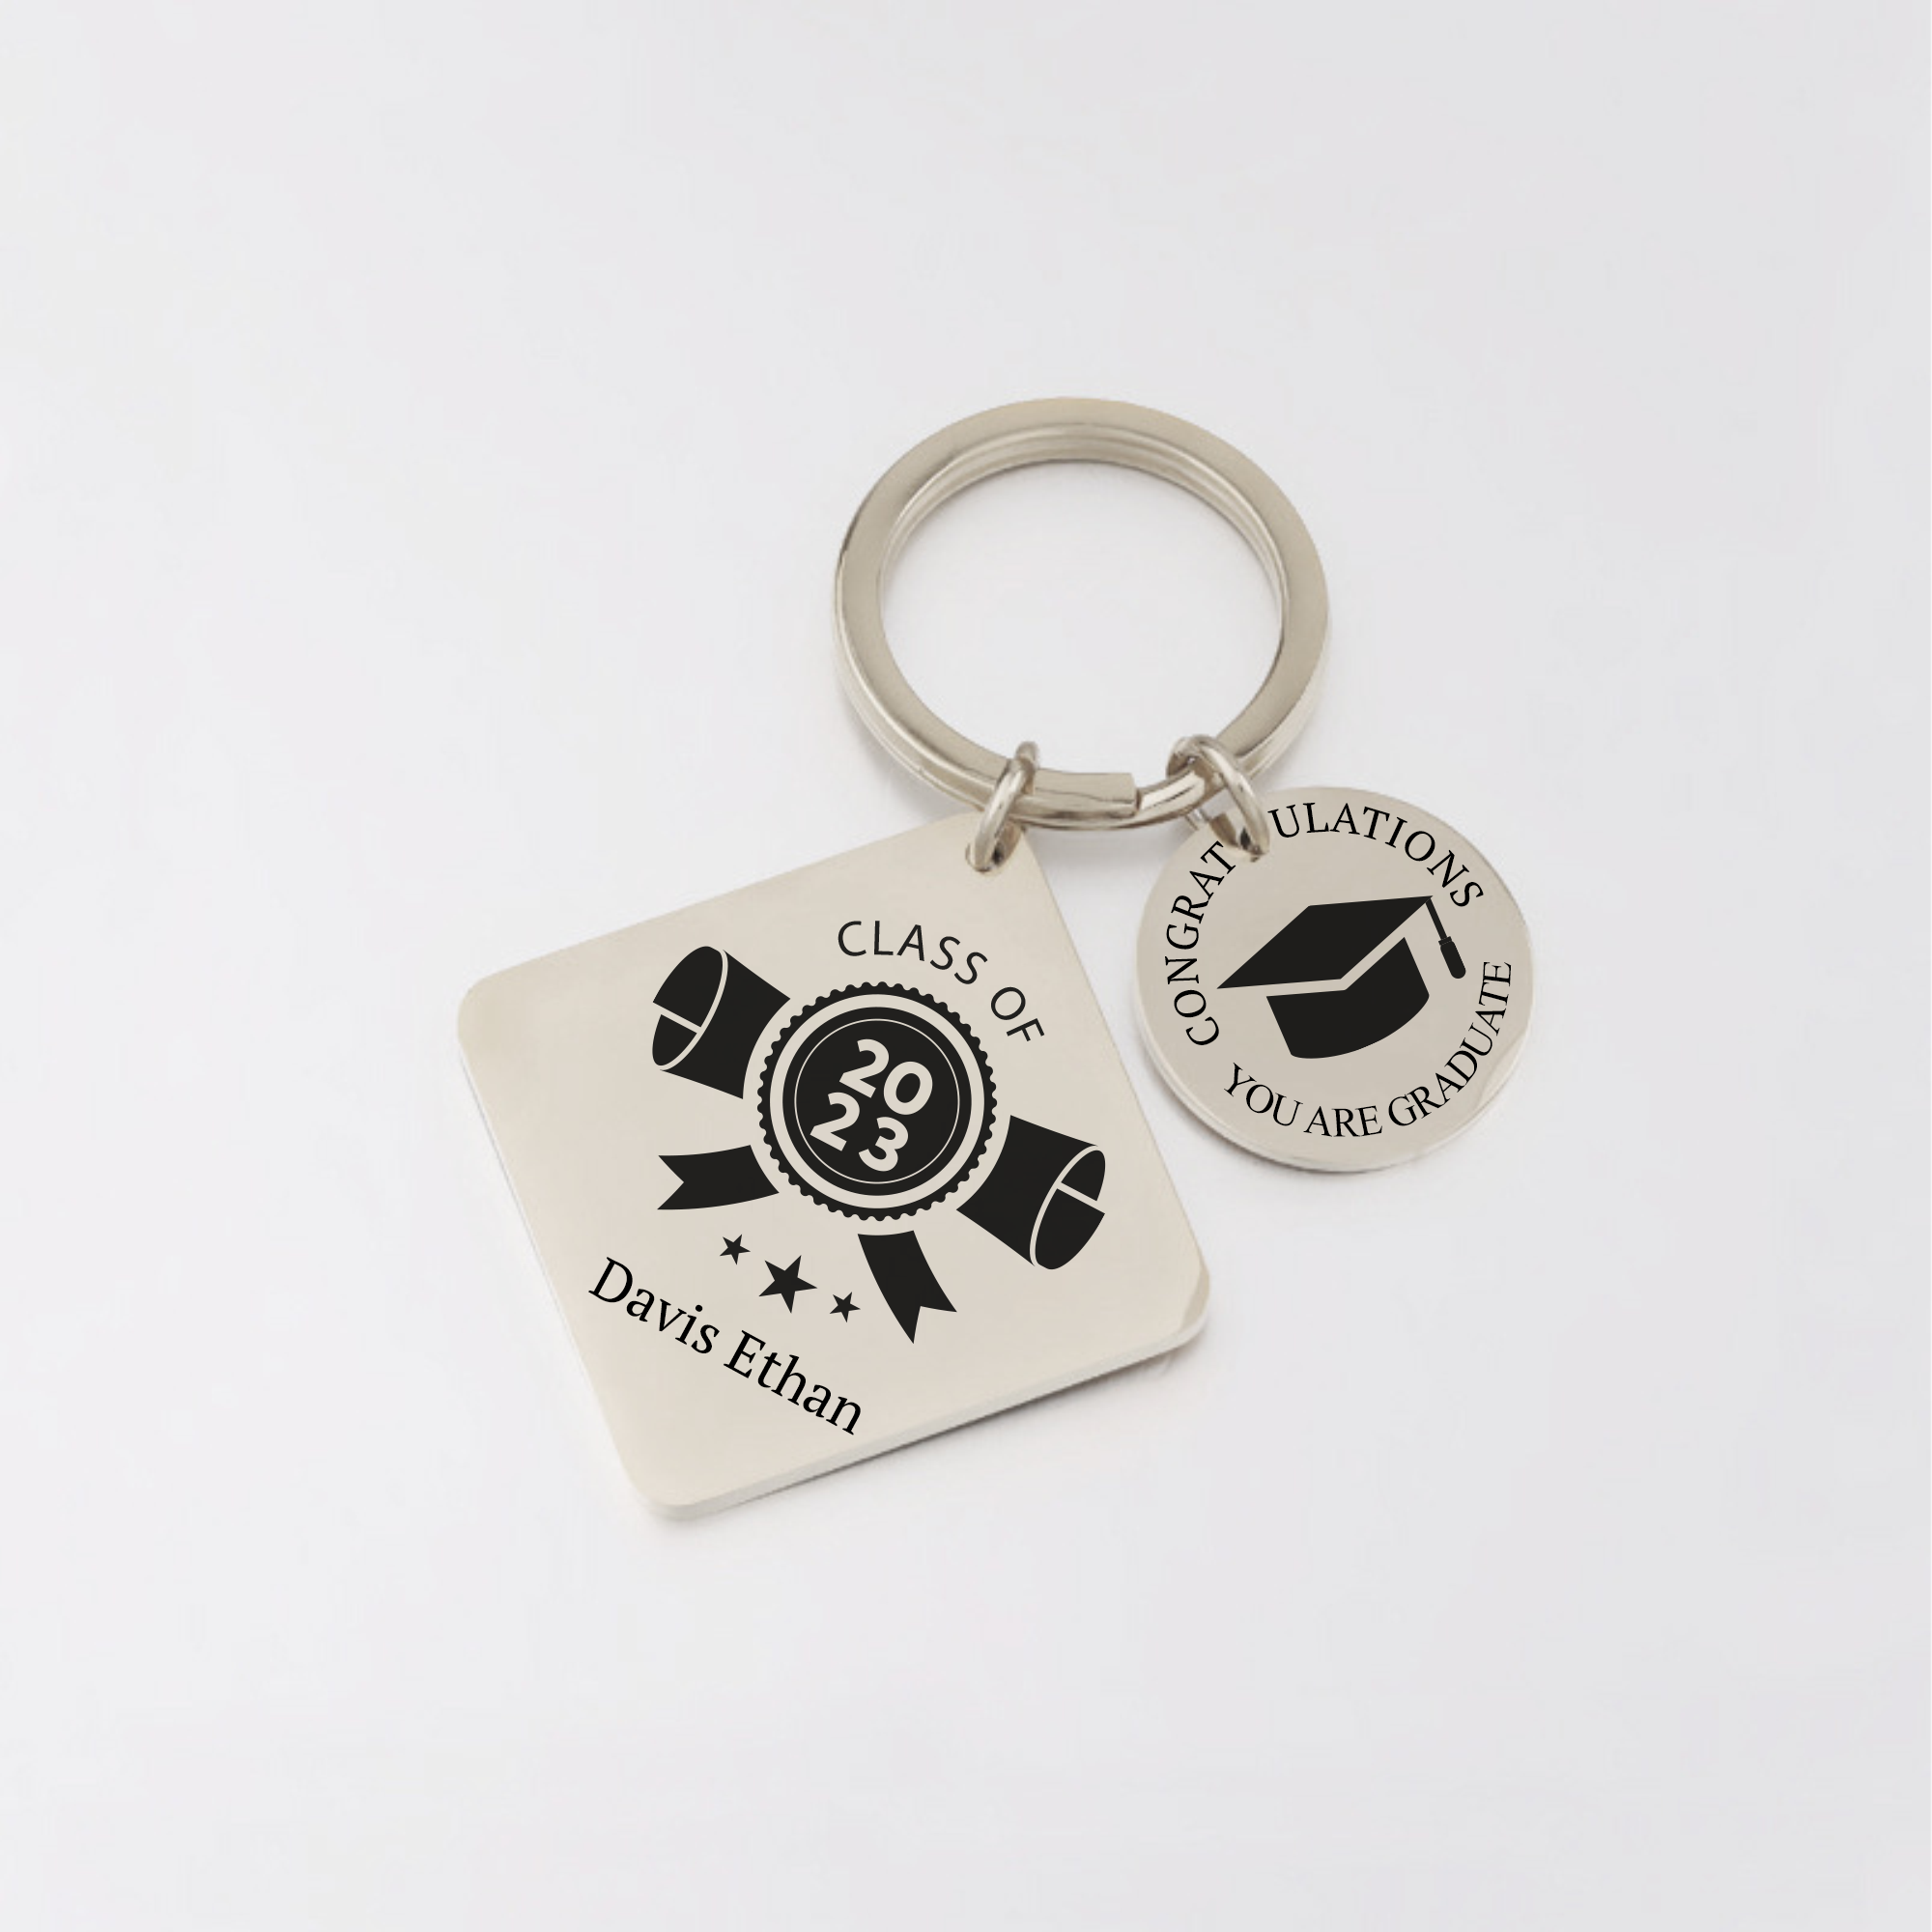 Graduction Class of the Year Keychain KCK 26 A